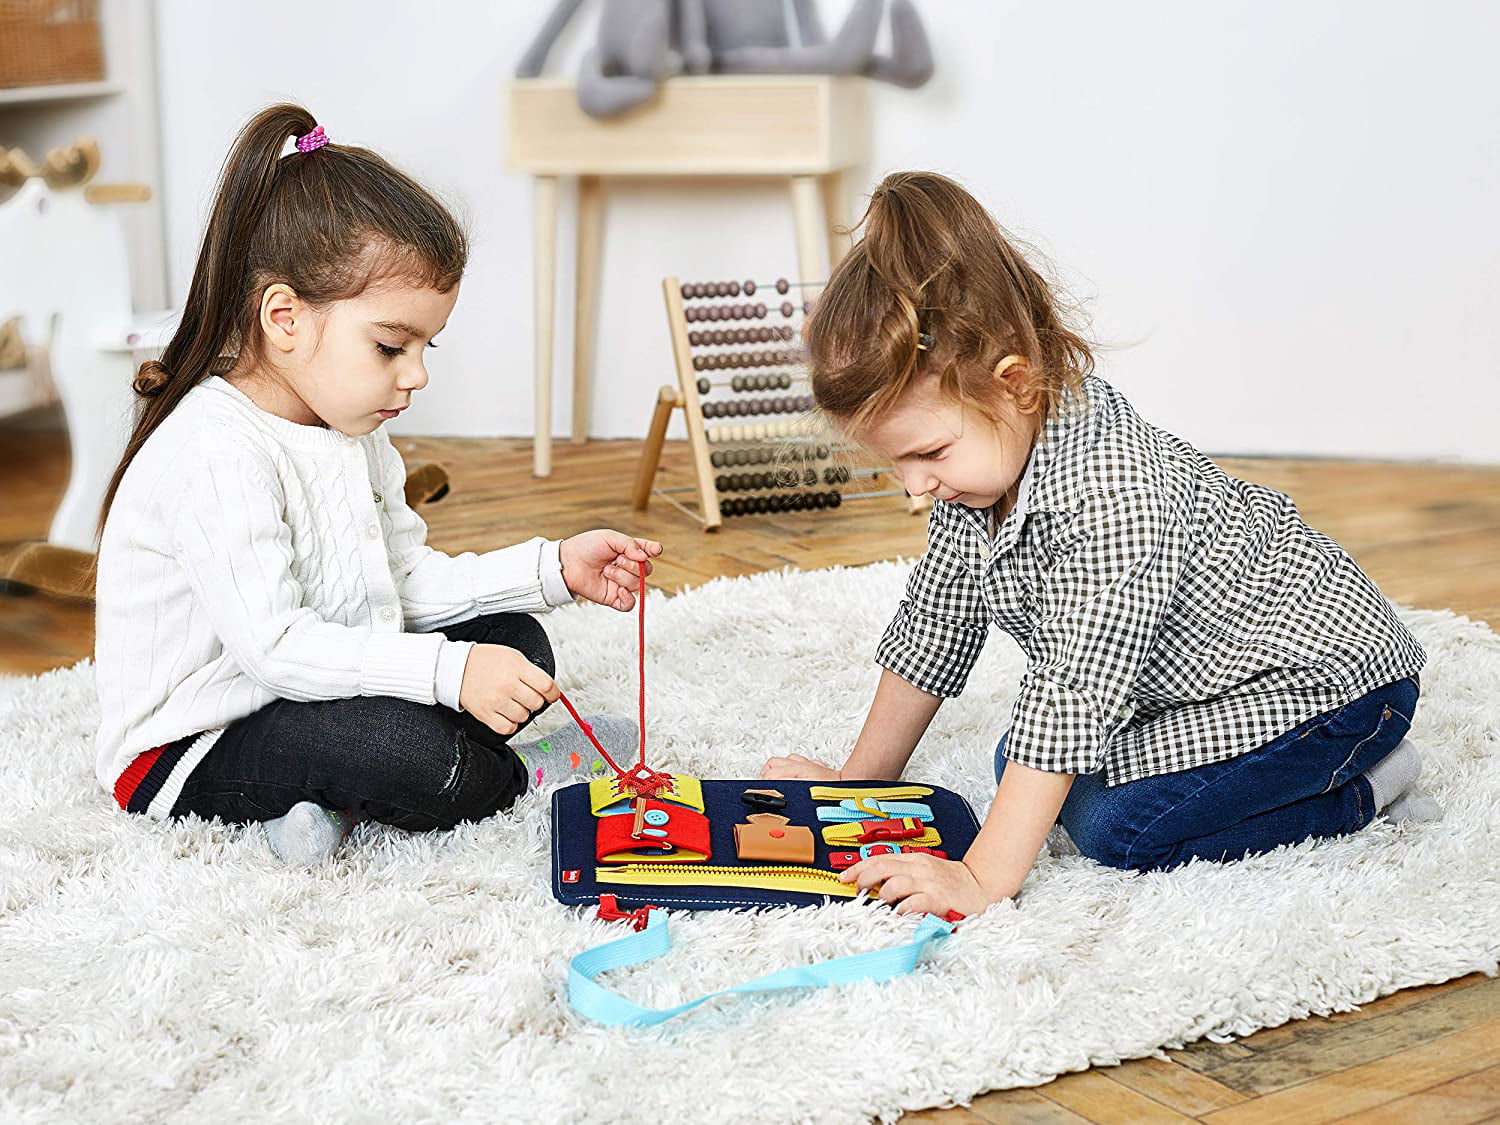 GYUEE Busy Board,Montessori Toys for Toddler,Sensory Board for Learning  Fine Motor&Basic Life Skills for 1 2 3 4 Years 